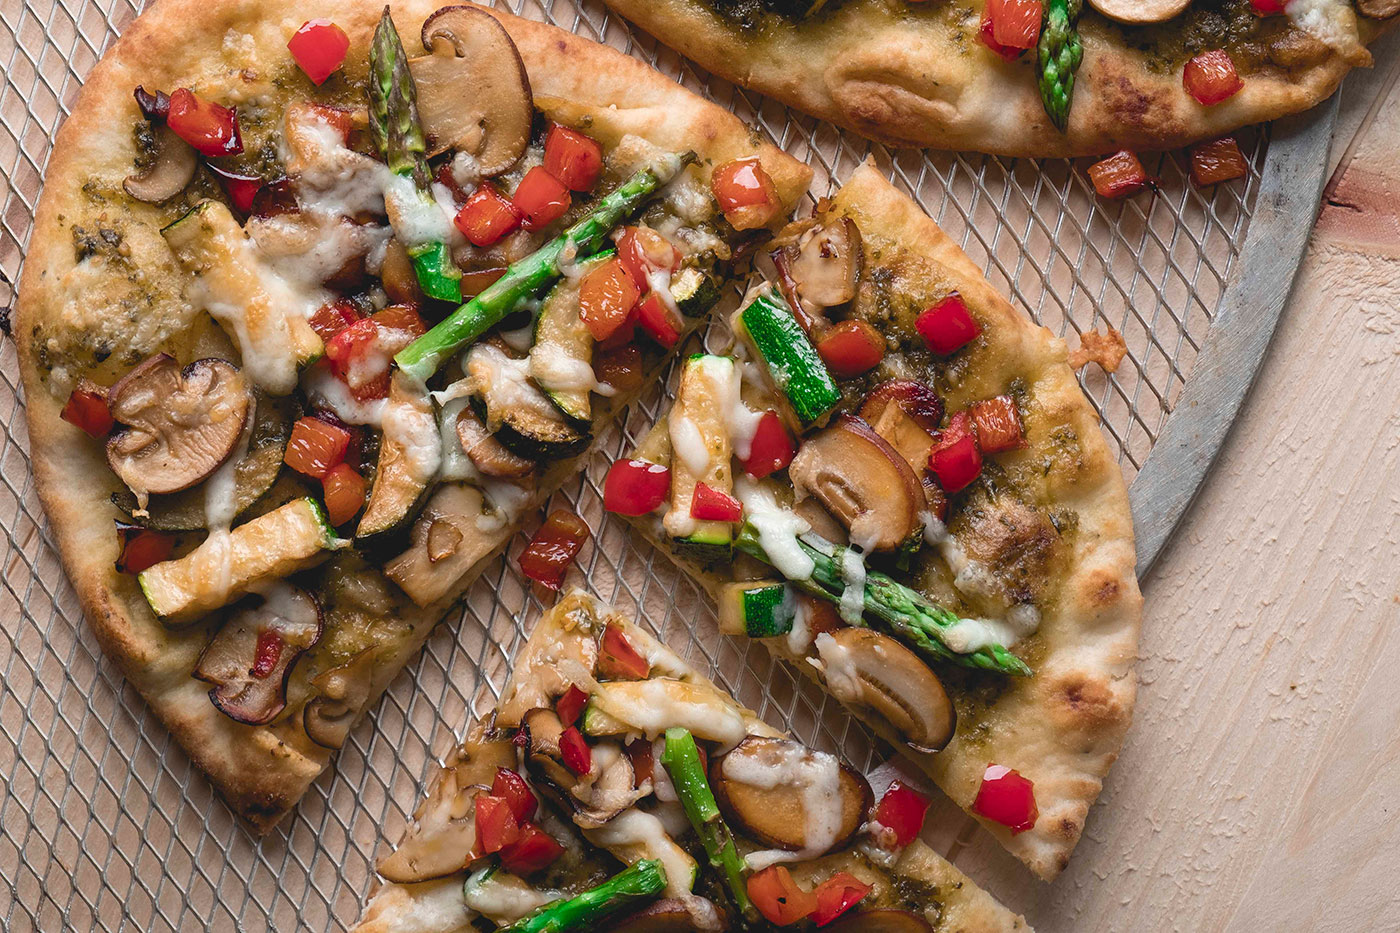 Did you say healthy pizza? Sign us up! Veggies grilled to perfection creates the optimal crunch and flavor burst perfect for any occasion!